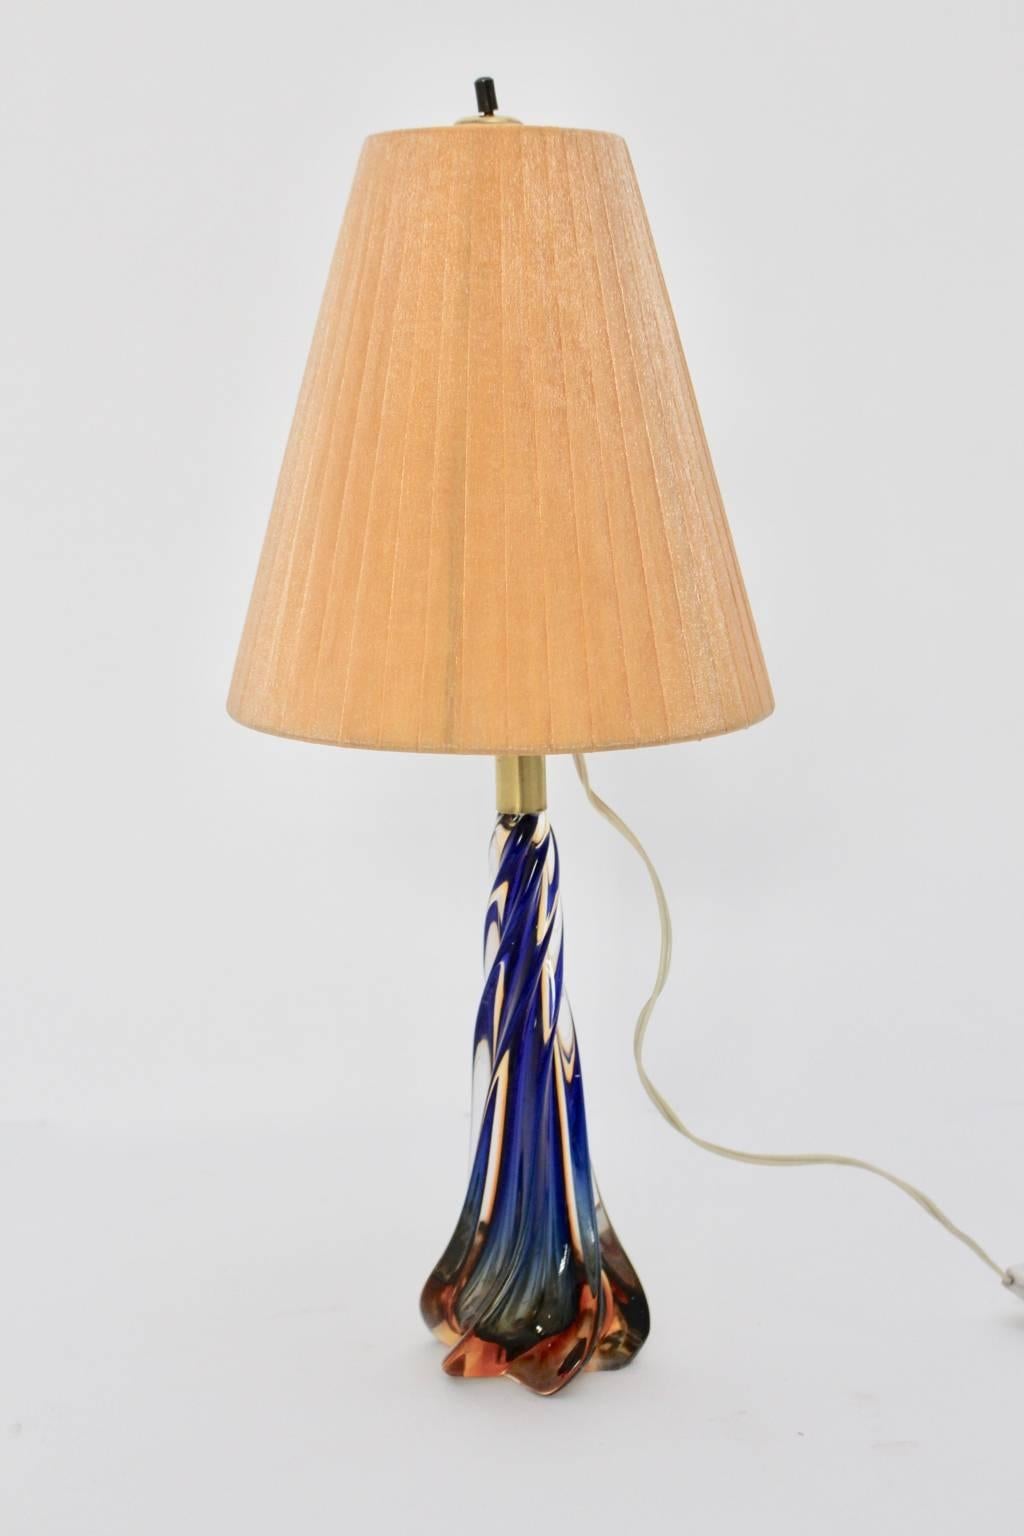 Mid-Century Modern vintage blue and orange Murano glass table lamp, which shows turned glass base and brass details. This delicate piece was designed and made out in Murano, Venice, Italy in the 1950s.
The cute and beautiful glass base shows an